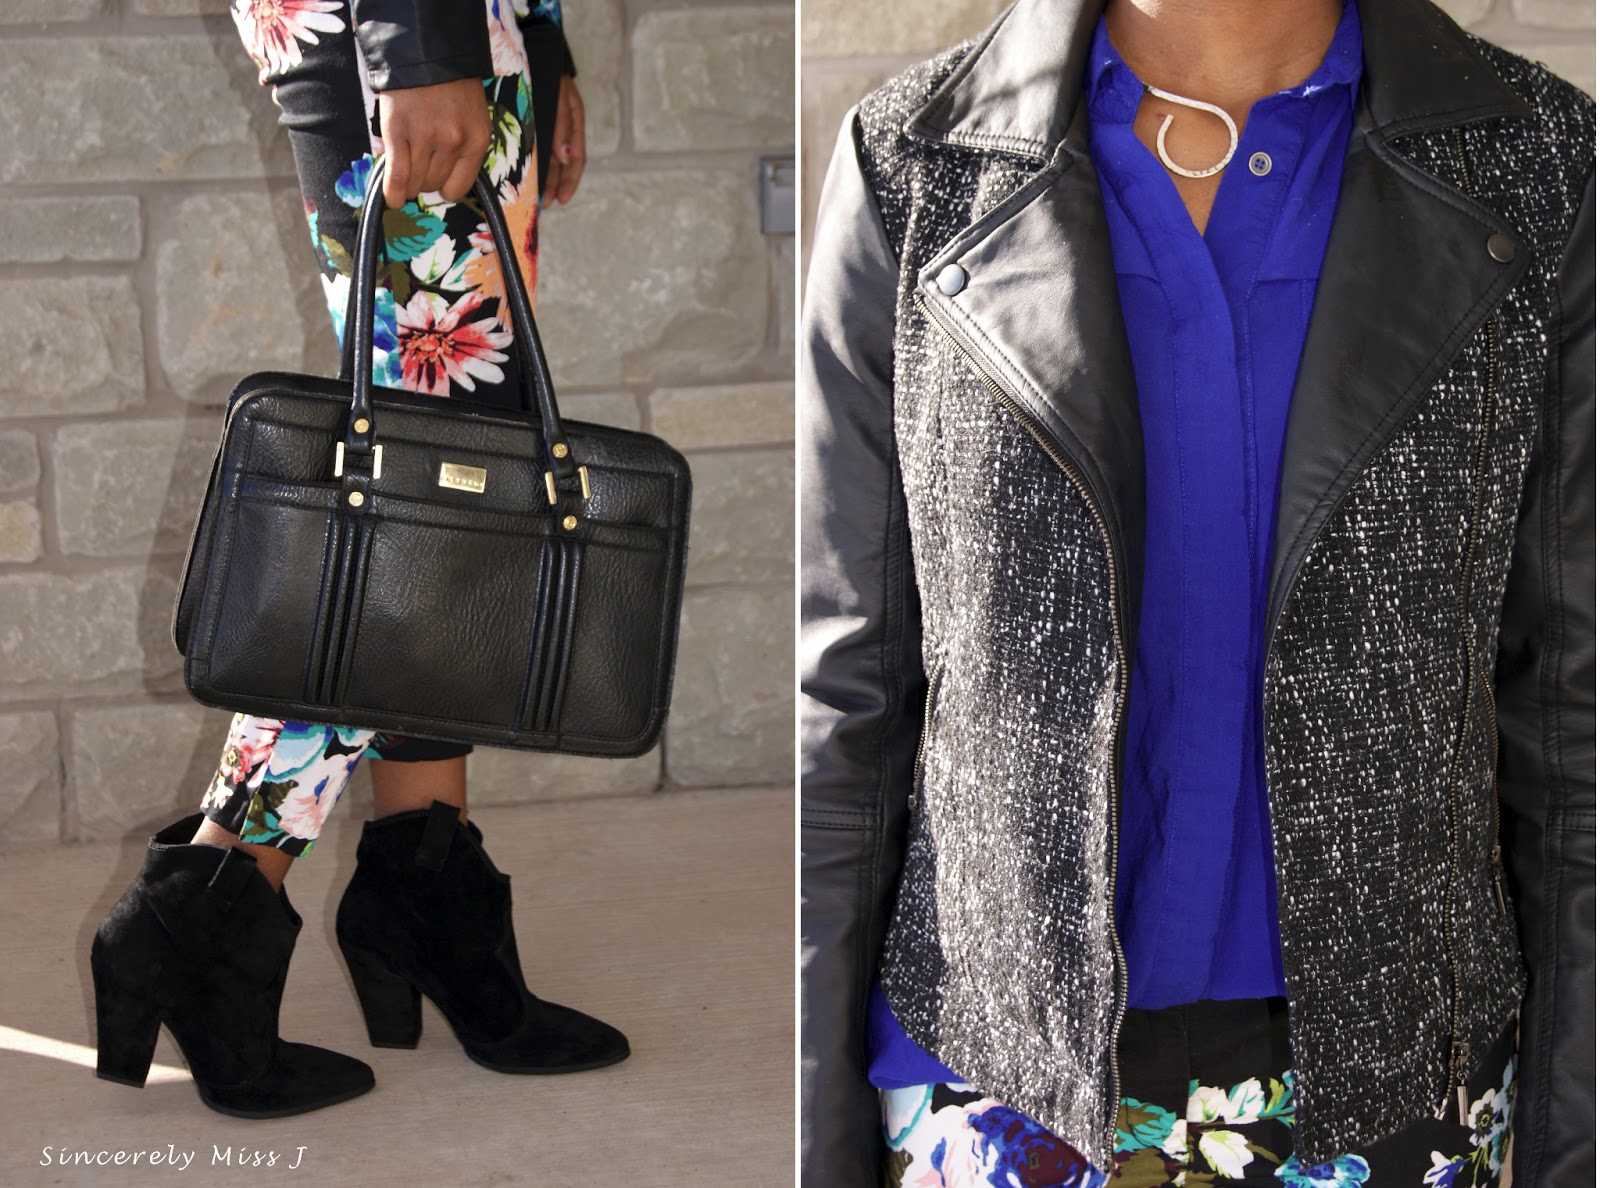 Stylish leather bag and neon shirt to shine brightly during cold days